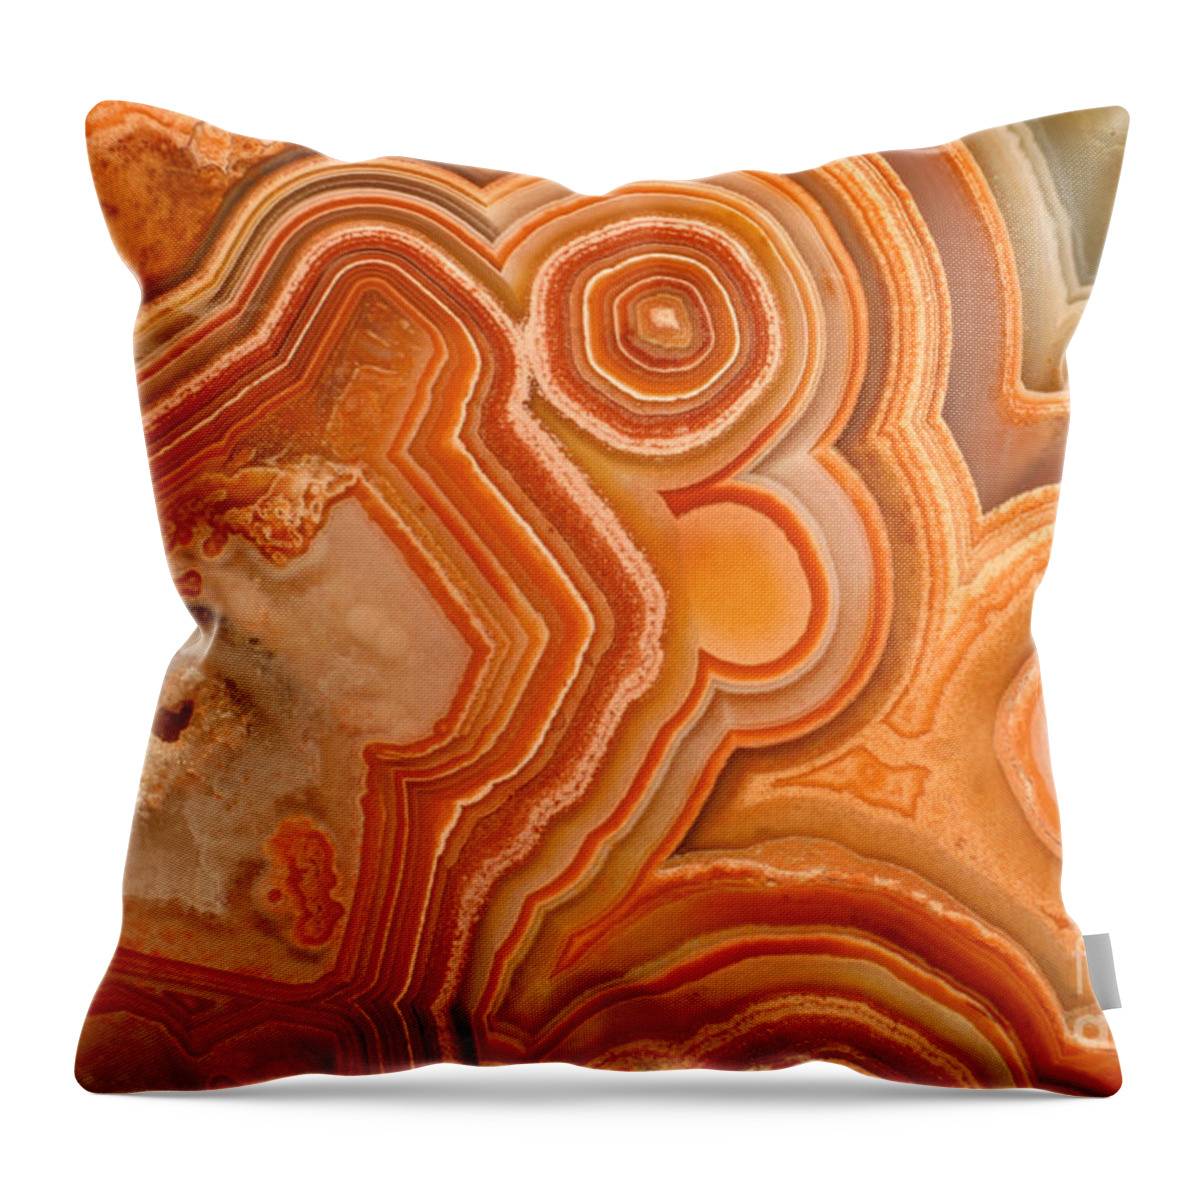 Agate Throw Pillow featuring the photograph Agate #1 by Ted Kinsman